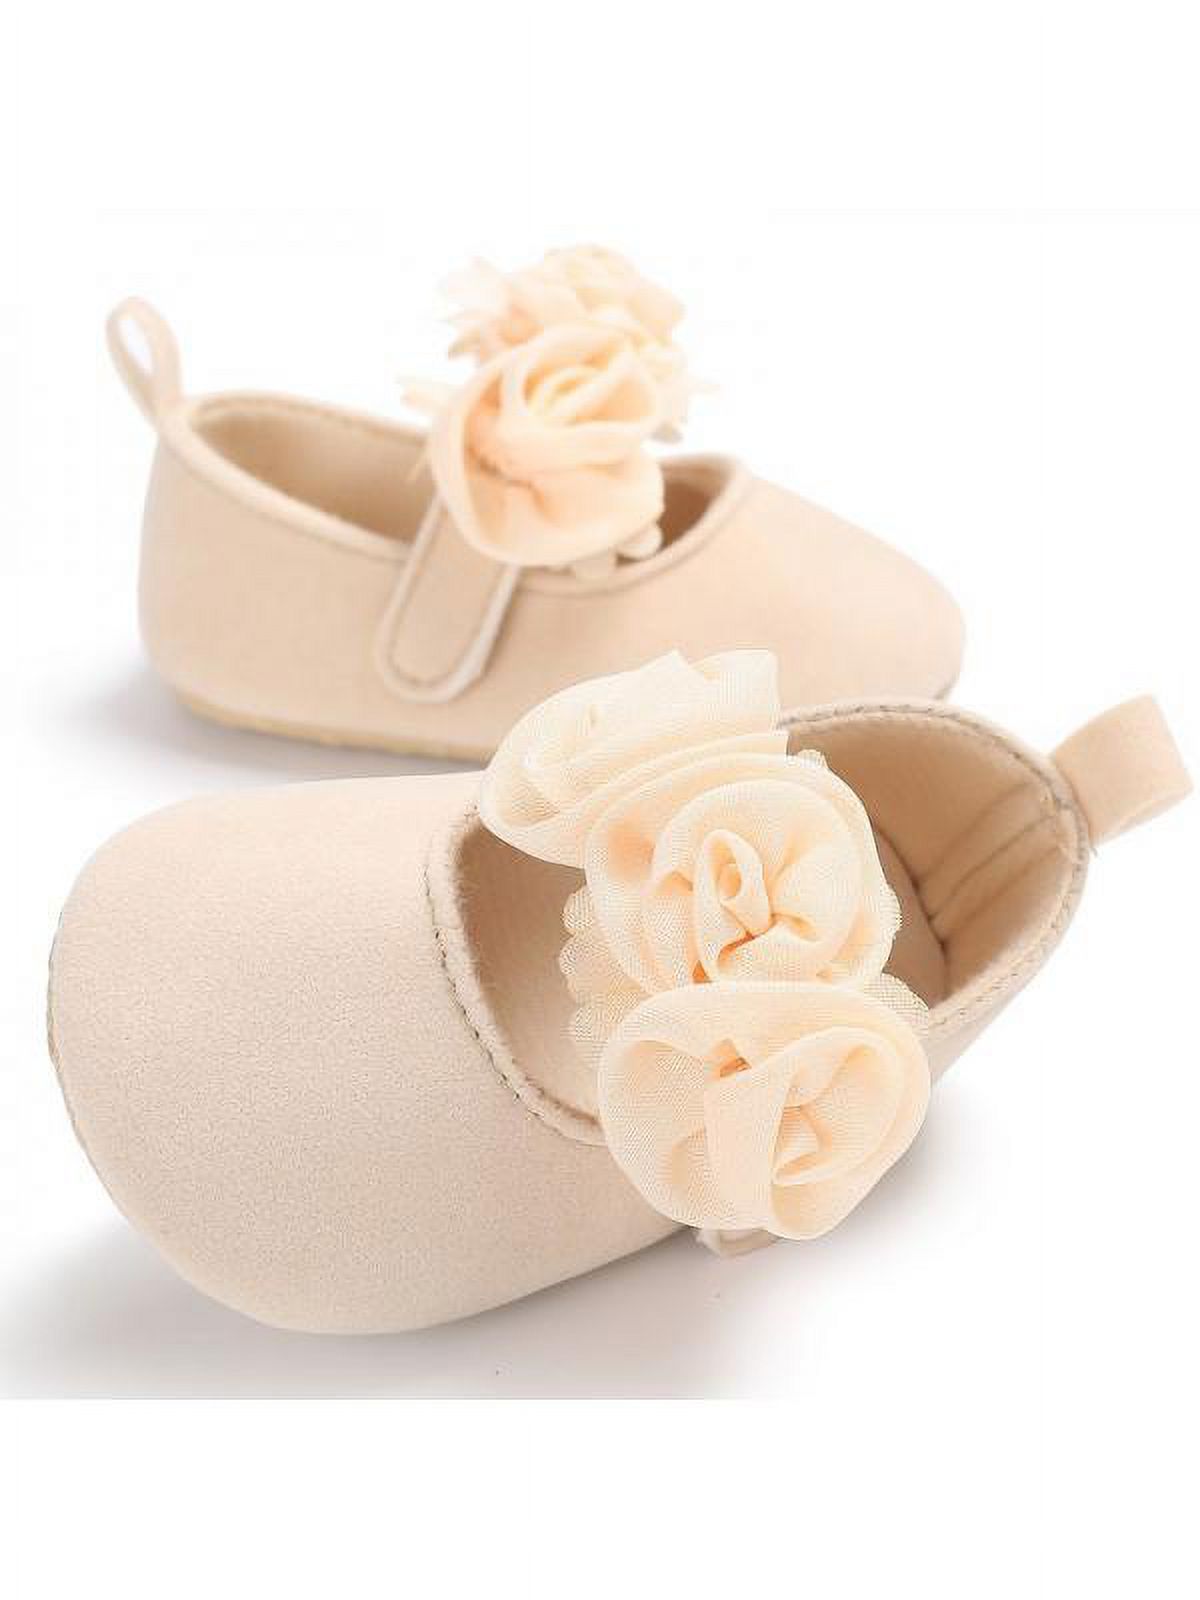 Lovely Kid Girls Princess Shoes Flowers Dance Shoes Suede Ballet Shoes Anti-slip Soft Sole Crib Hook & Loop Shoes (Toddler/Little Baby Girls) - image 5 of 7